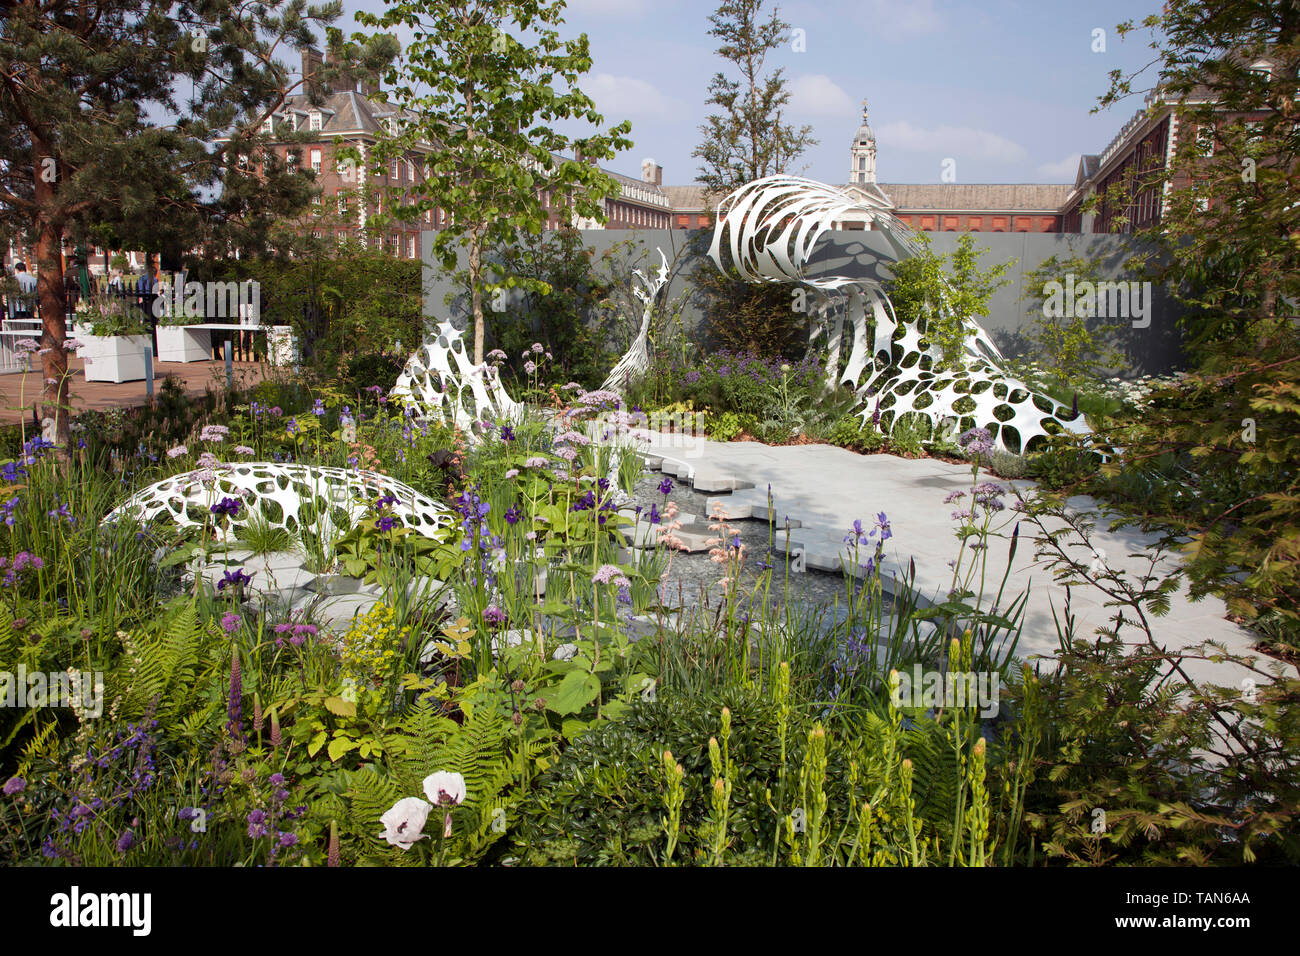 The Manchester Garden, Space to Grow Garden at RHS Chelsea Flower Show 2019 Stock Photo